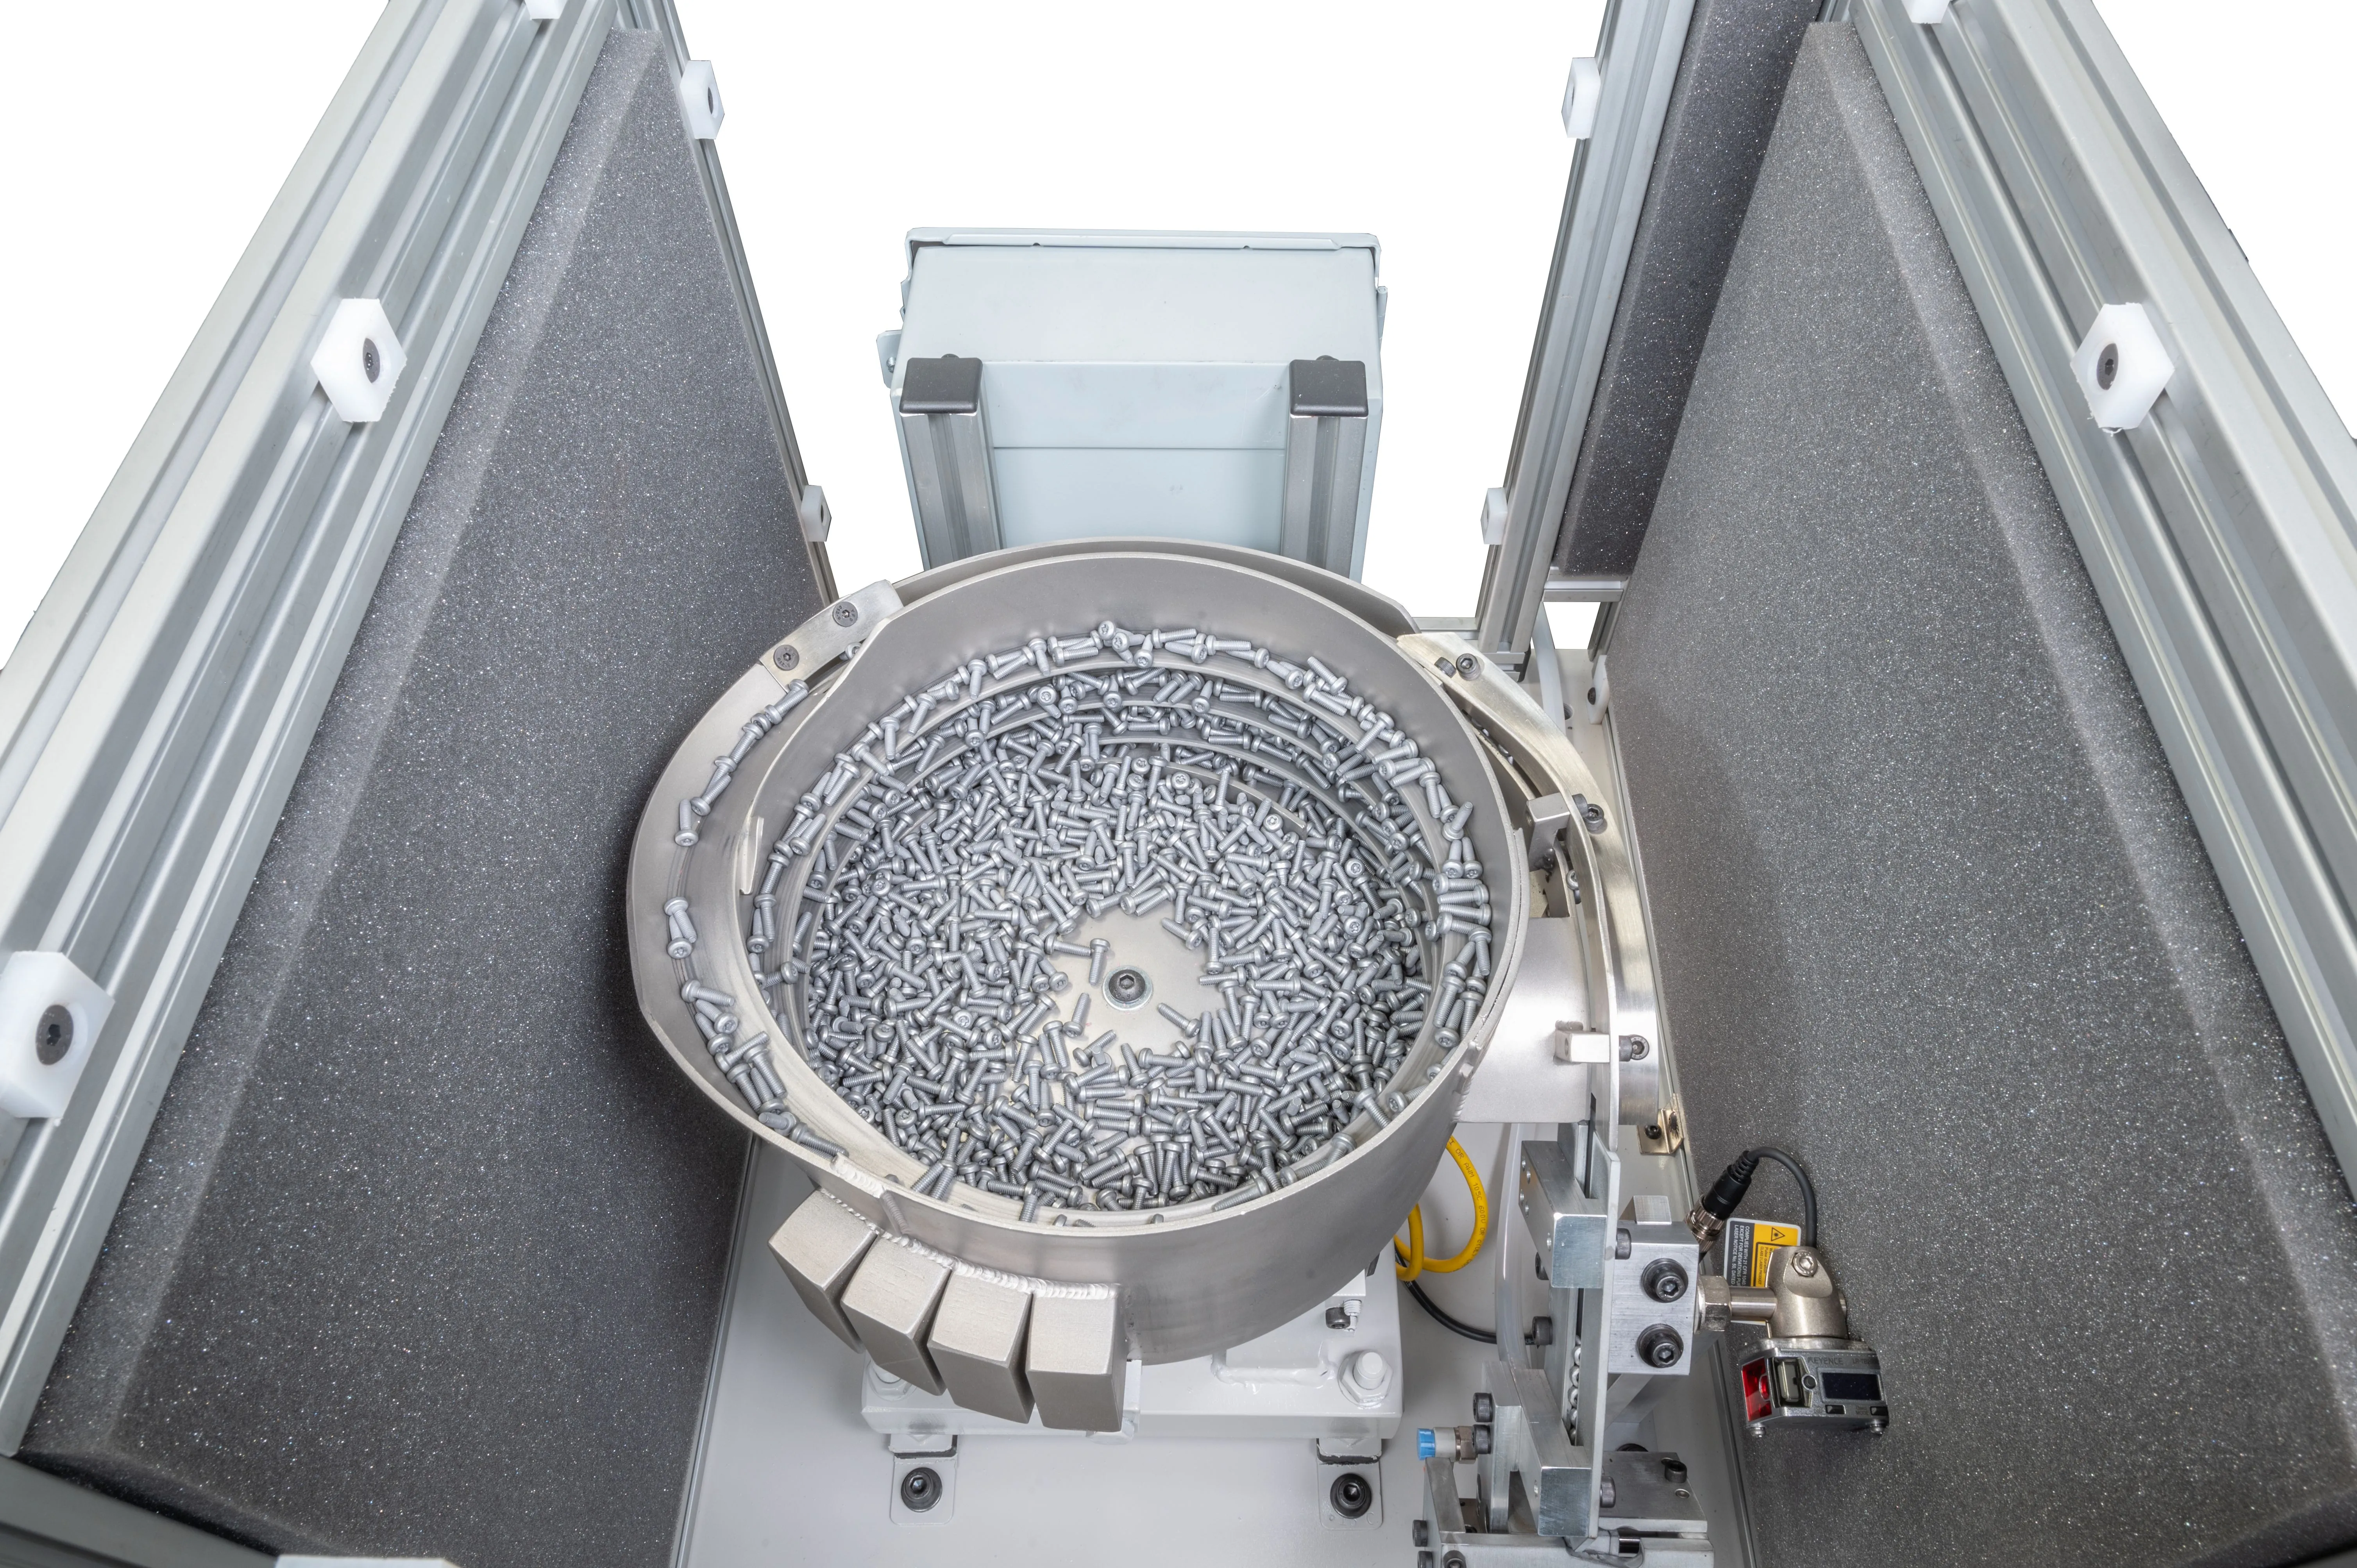 Industrial feeder equipment with a large number of metal fasteners in a vibratory bowl for automated assembly.